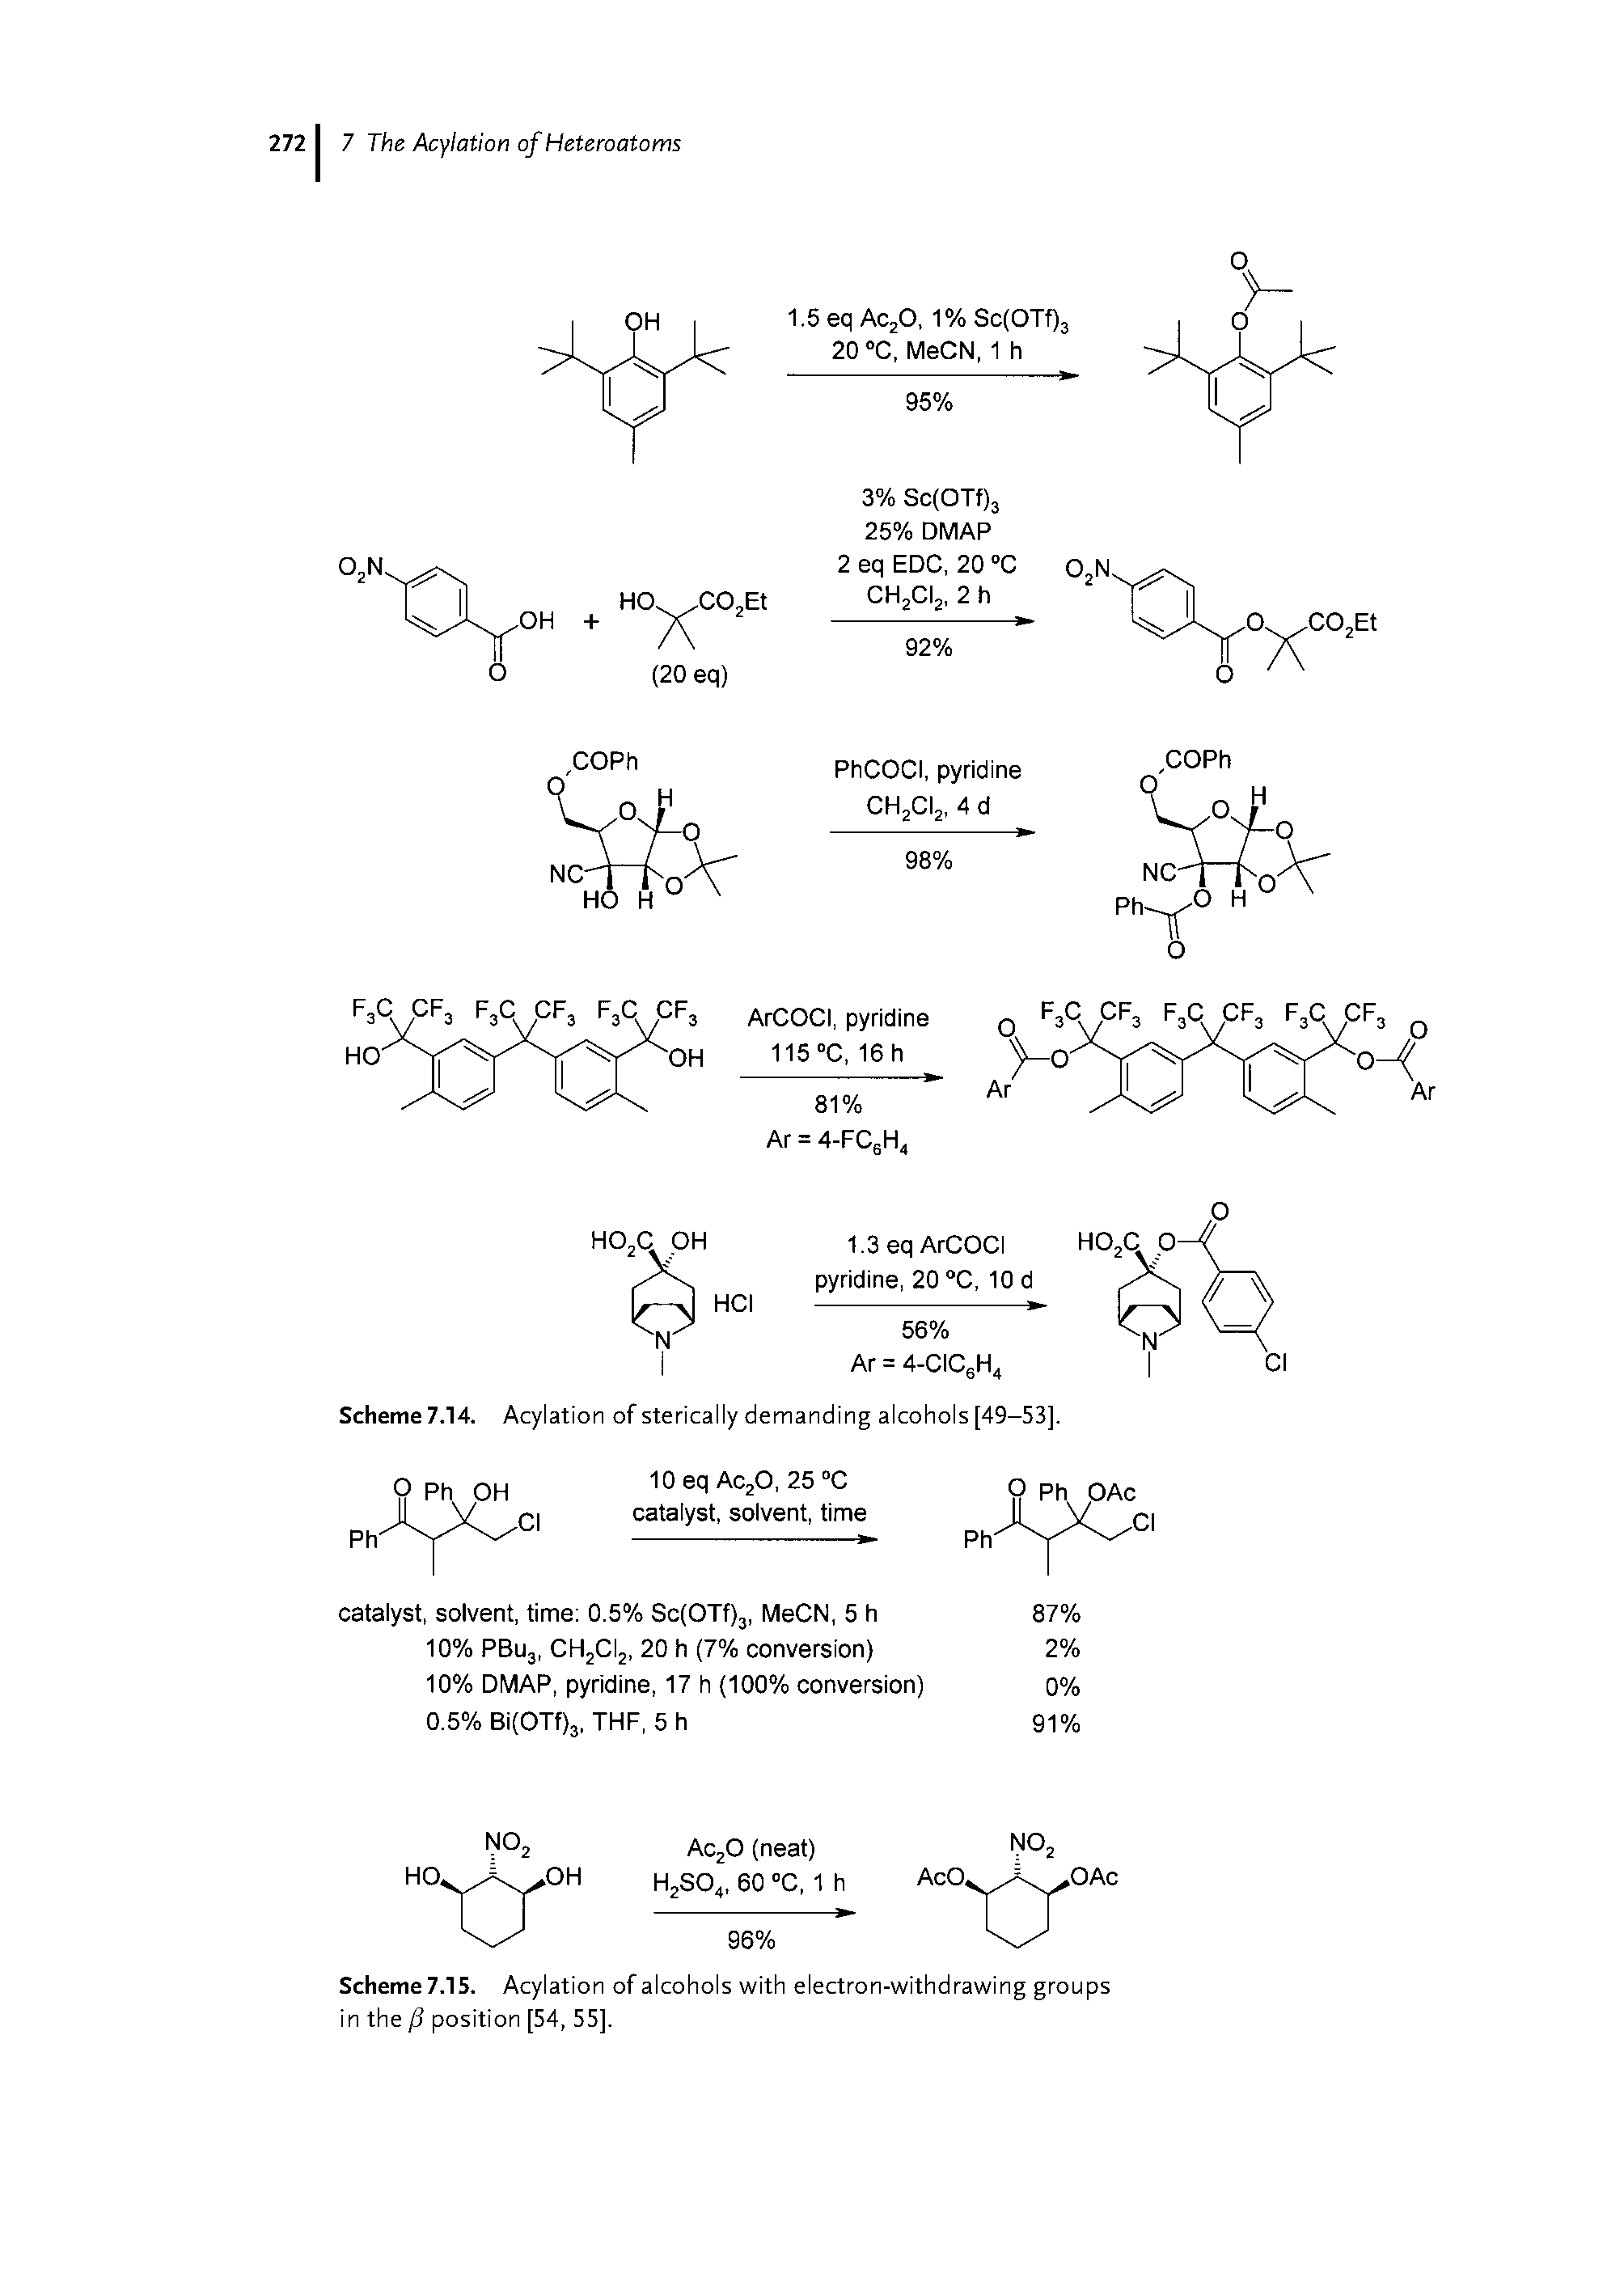 Scheme 7.15. Acylation of alcohols with electron-withdrawing groups in the p position [54, 55],...